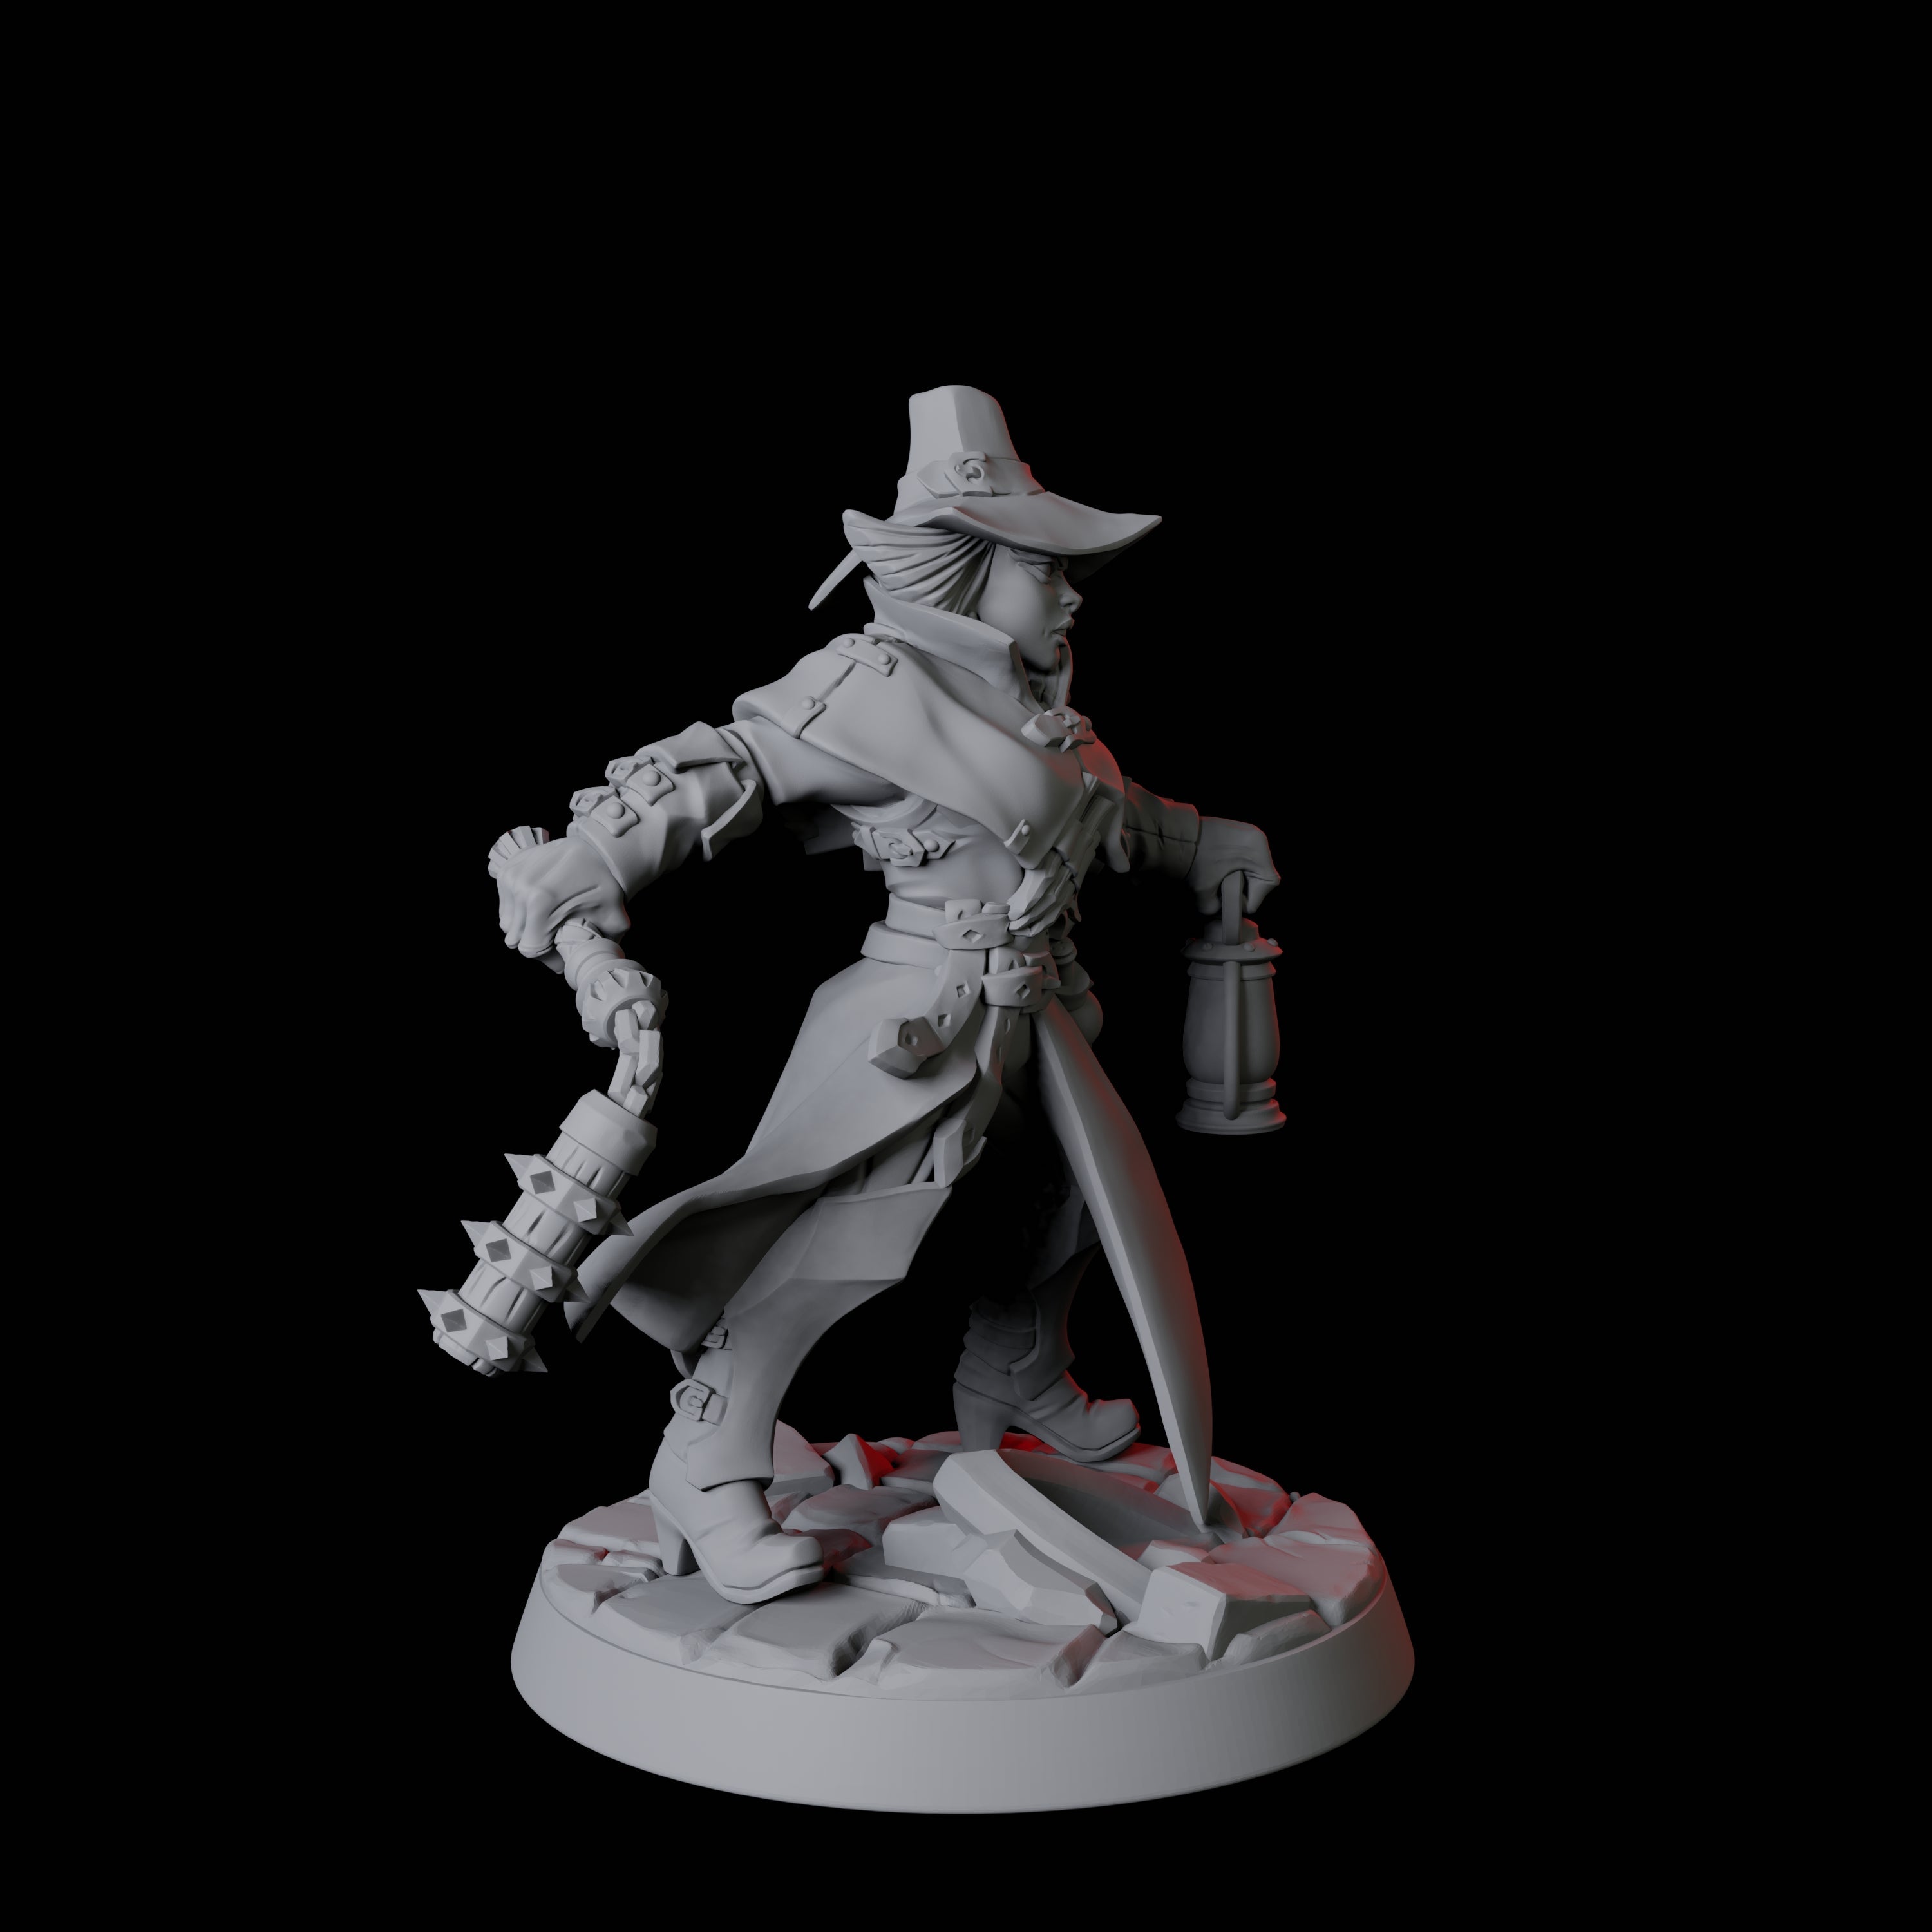 Vampire Hunter D Miniature for Dungeons and Dragons, Pathfinder or other TTRPGs